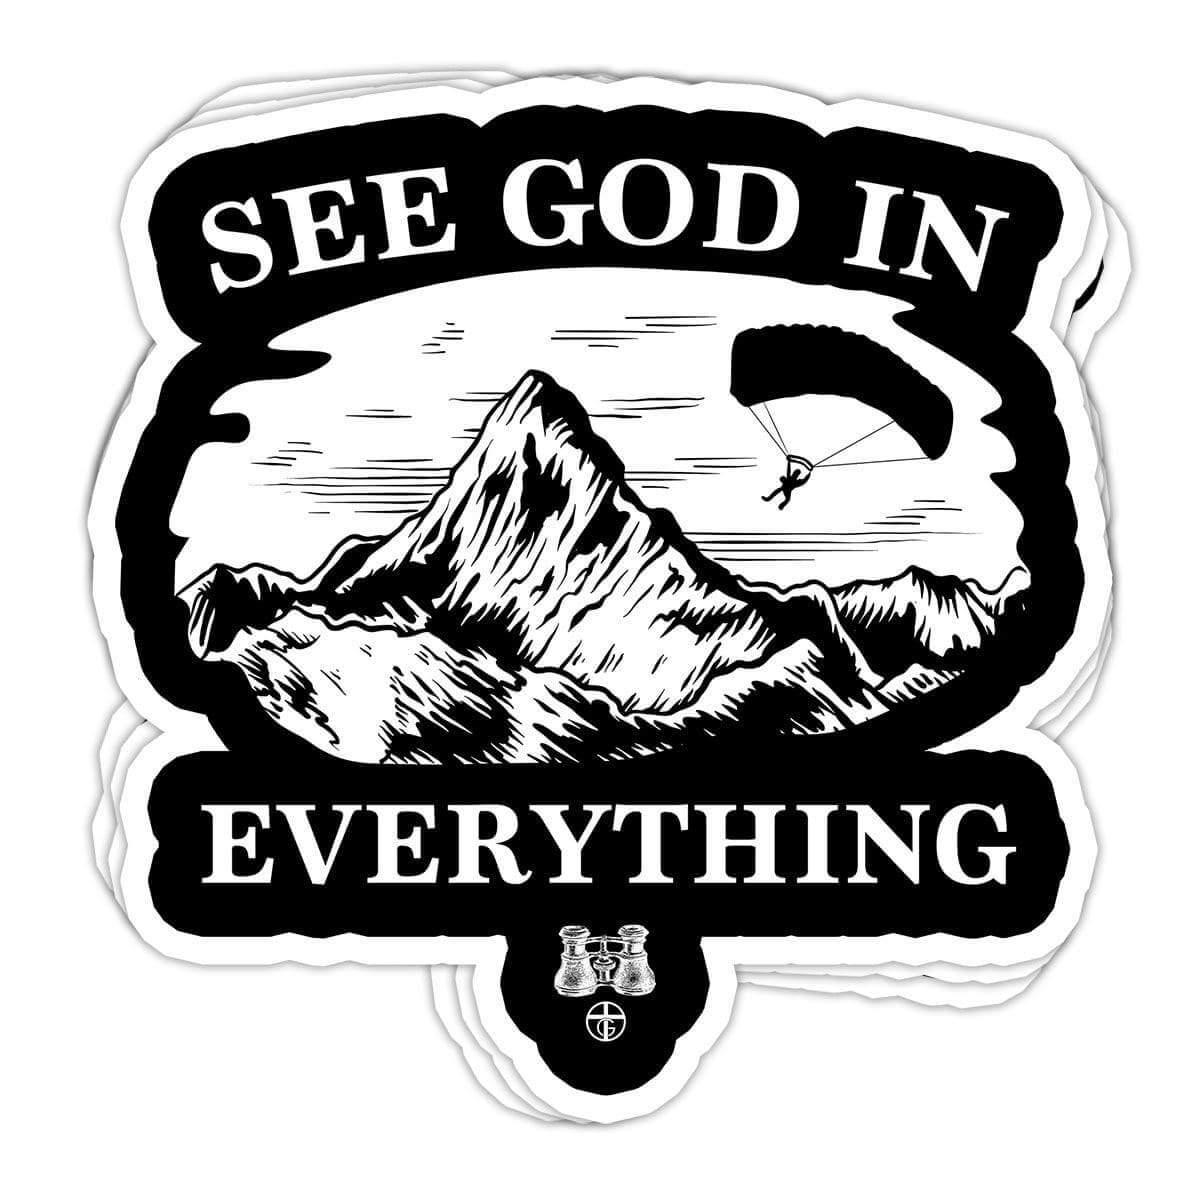 See God in Everything Decals - Our True God